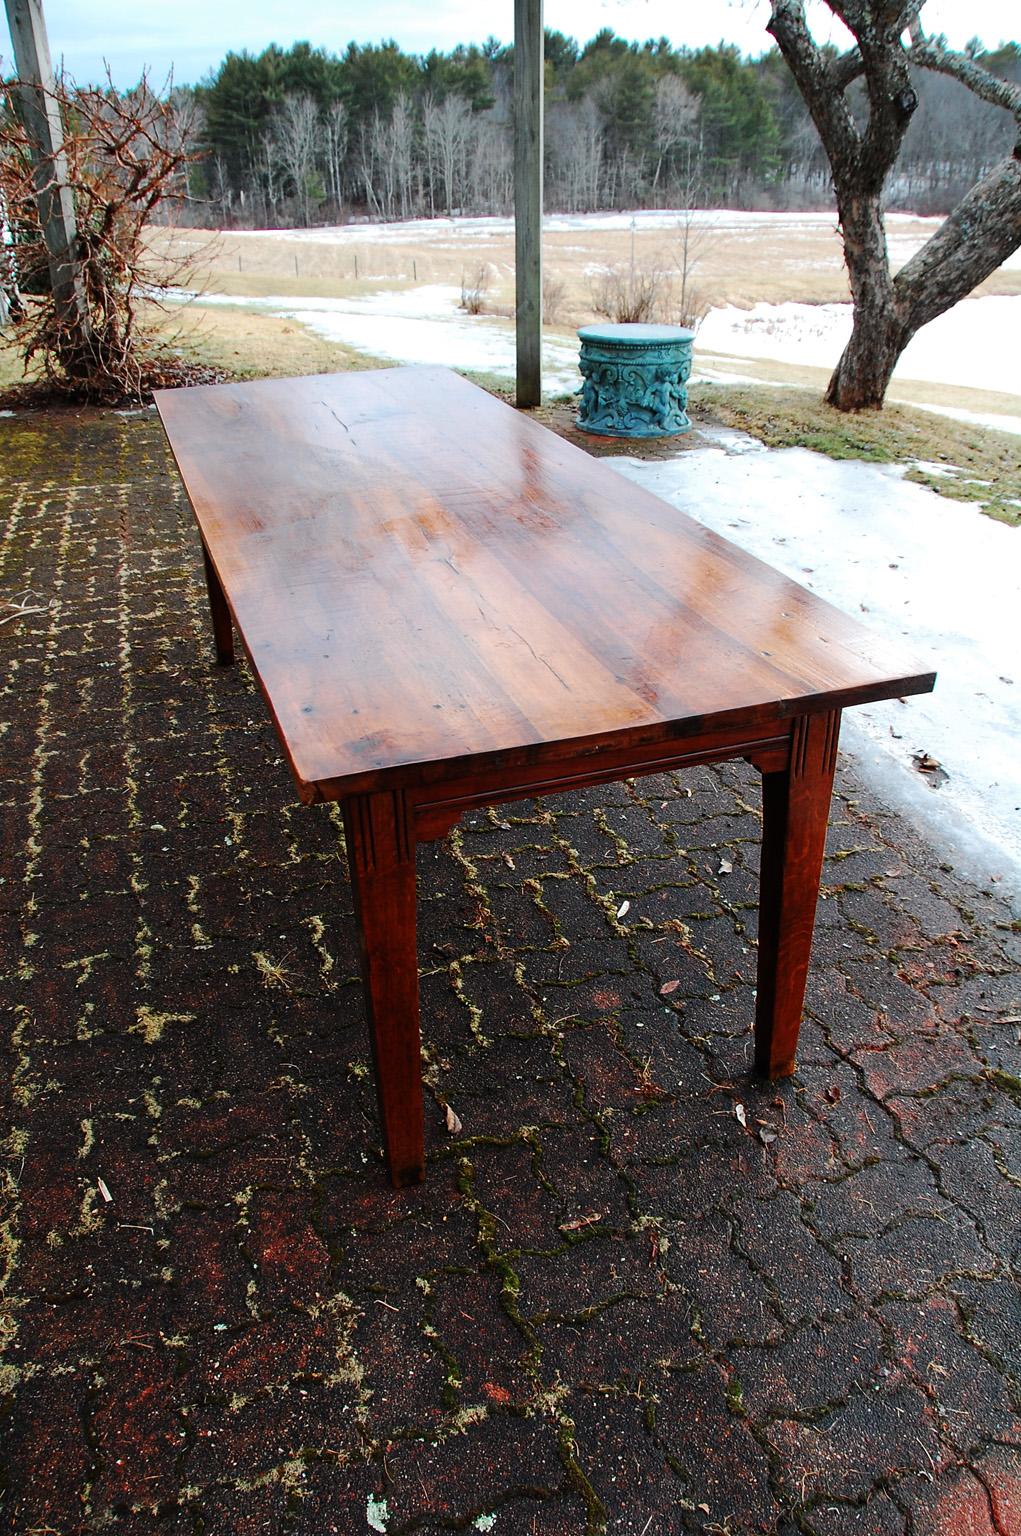 French provincial farmhouse table from the Burgundy region of France. The table top is thicker than normal, almost an inch and a half, of planked walnut with wonderful graining. The base is of oak has two drawers, one on each long side and tapered